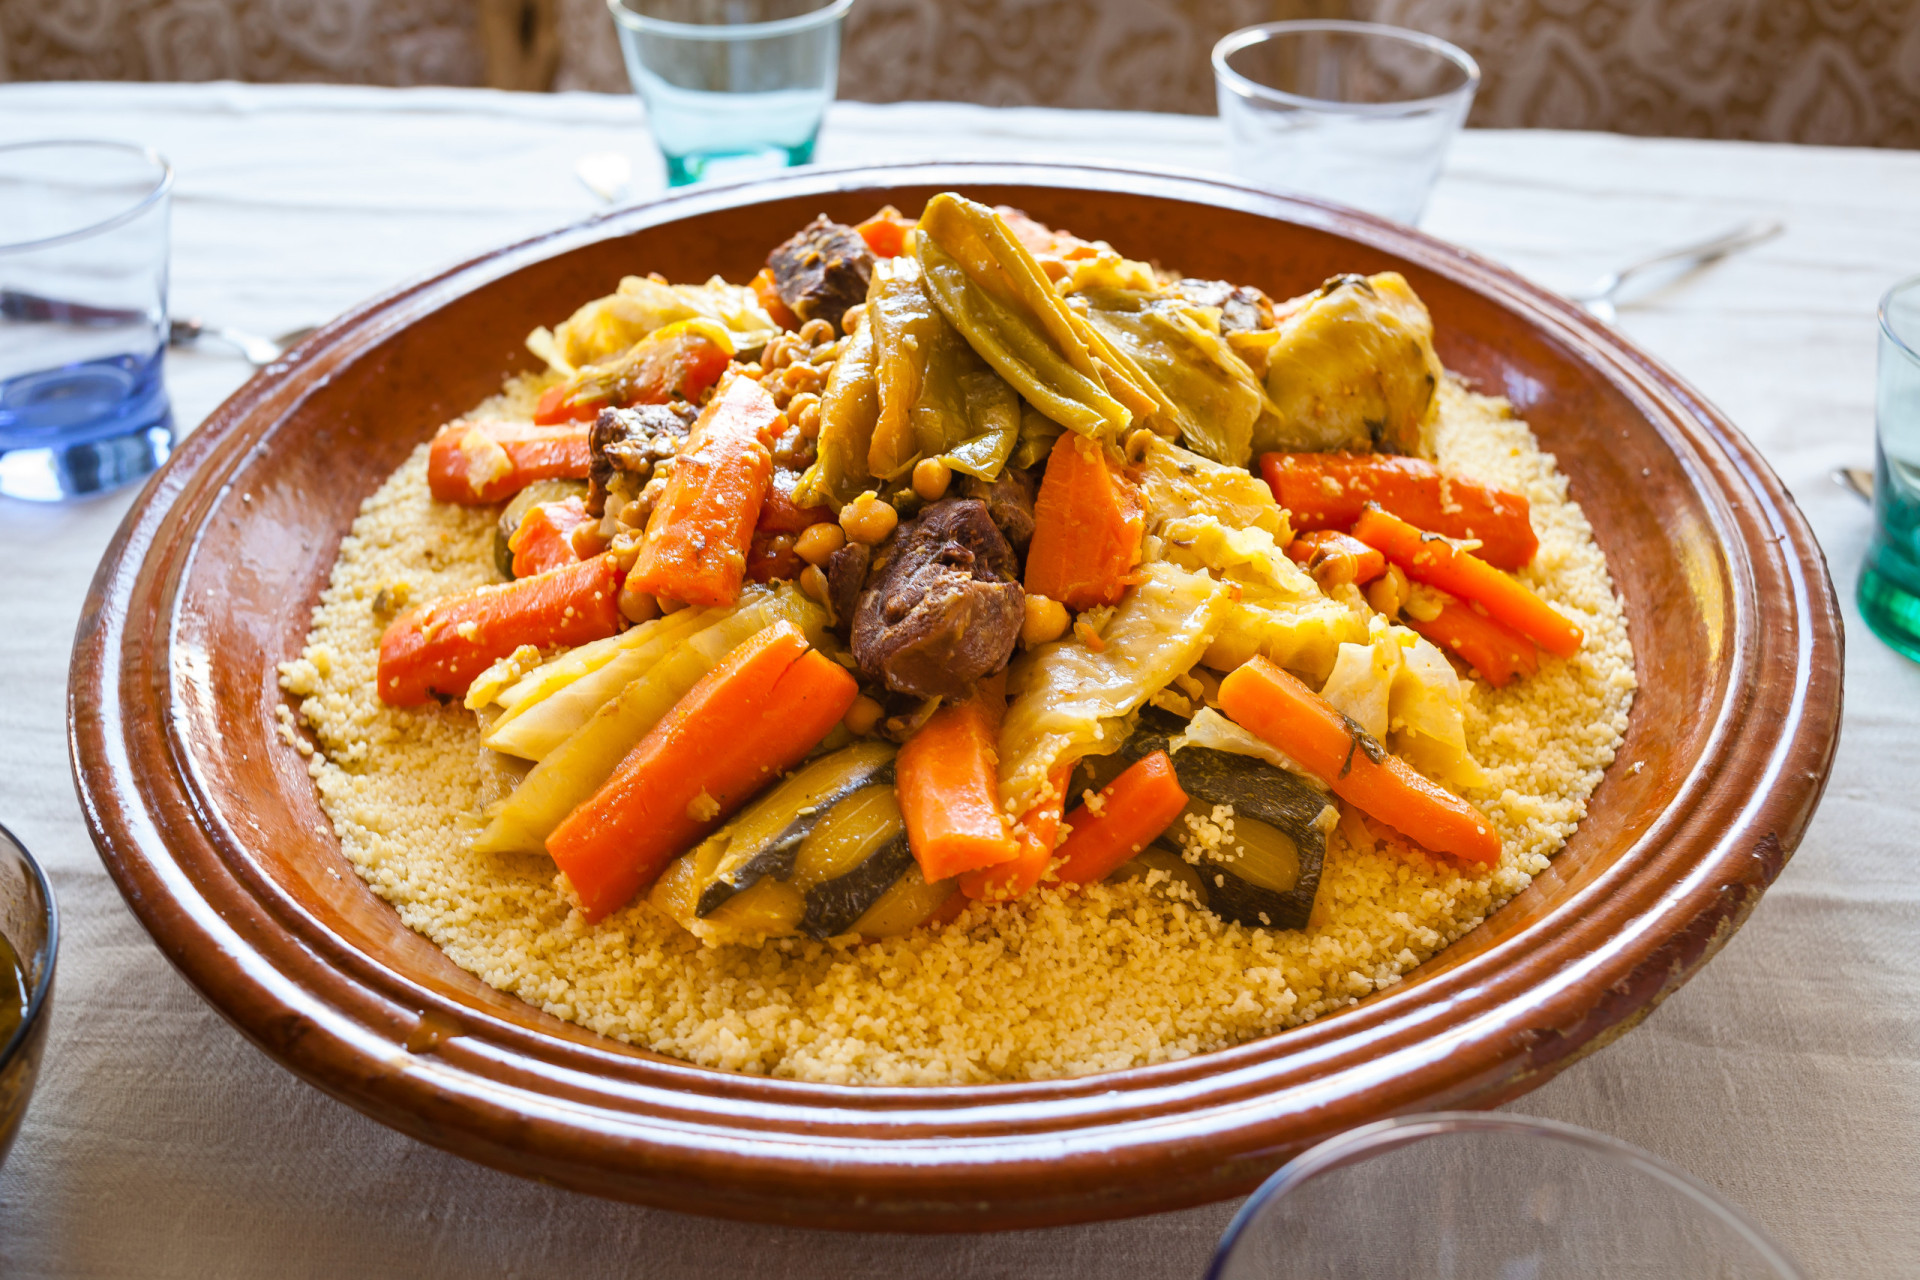 <p>Couscous is a staple dish in North African countries. It's made by steaming granules of semolina until light and fluffy. It's typically served alongside a stew.</p><p>You may also like:<a href="https://www.starsinsider.com/n/446410?utm_source=msn.com&utm_medium=display&utm_campaign=referral_description&utm_content=707039en-us"> Who are the richest royals in the world?</a></p>